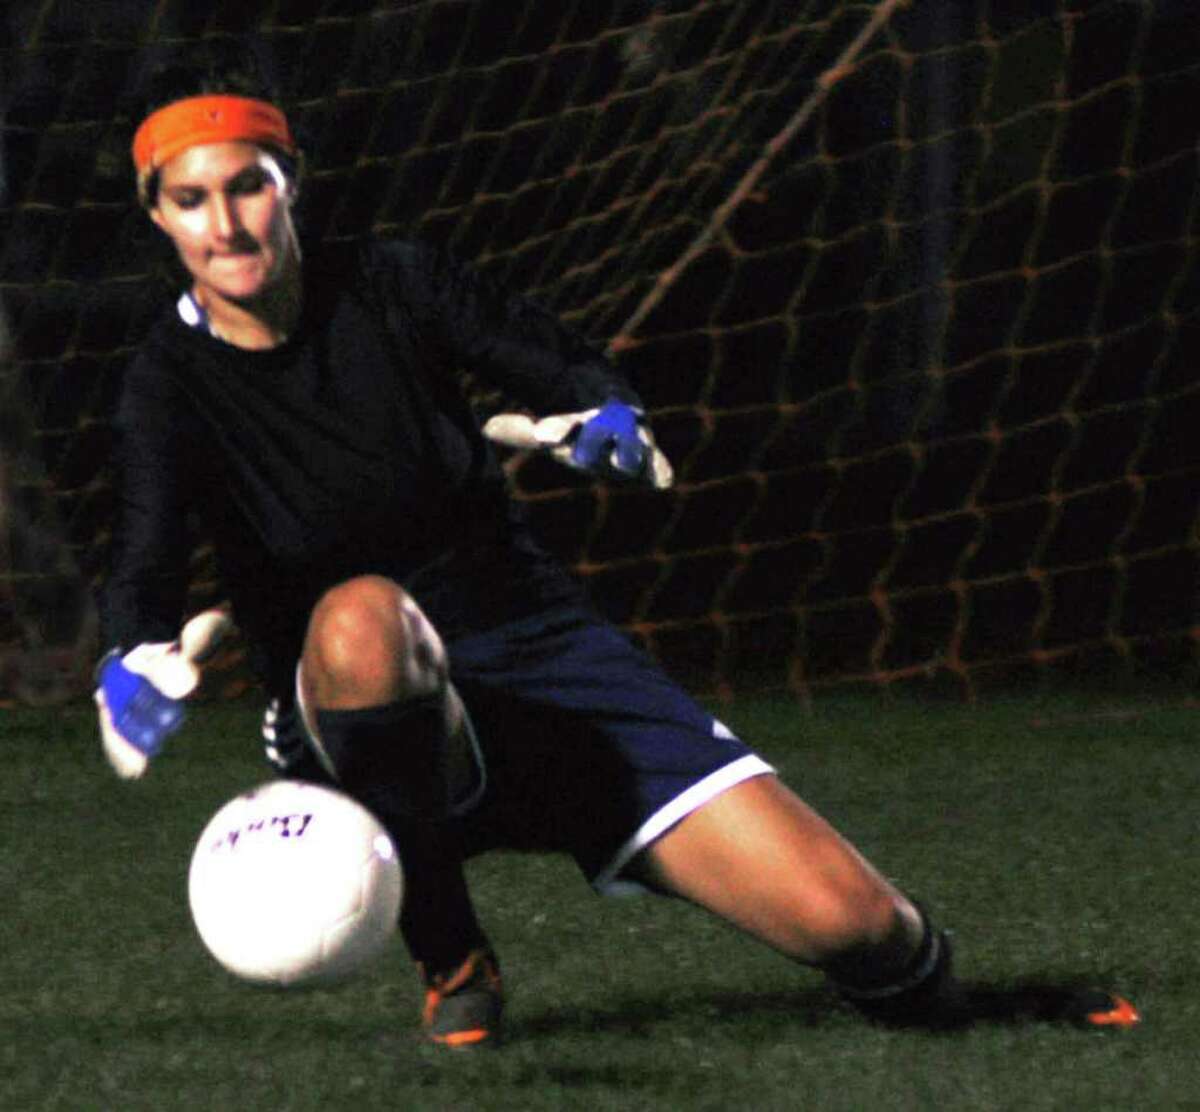 SPECTRUM/Goalkeeper Jane Thompson of New Milford High girls' soccer grabs a loose ball during NMHS' 1-1 draw with visiting Newtown, Oct. 13, 2011